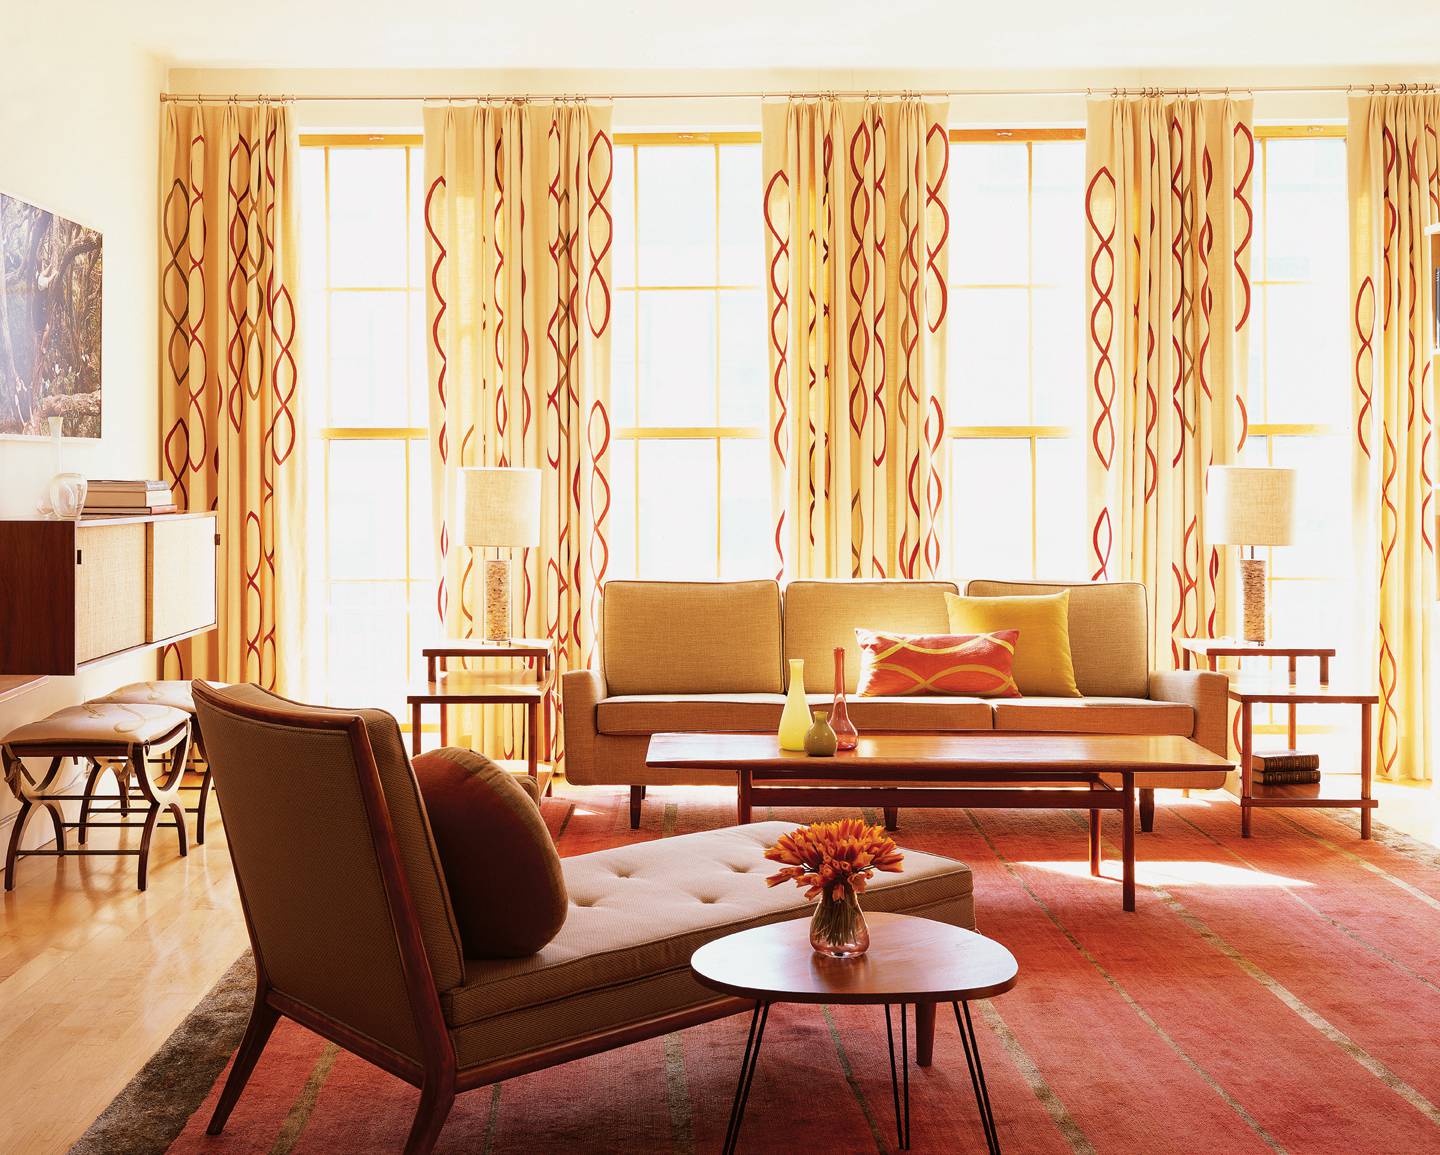 1GreenwichVillagePenthouse-1 Living room curtain ideas: Inspiring drapes that you could use